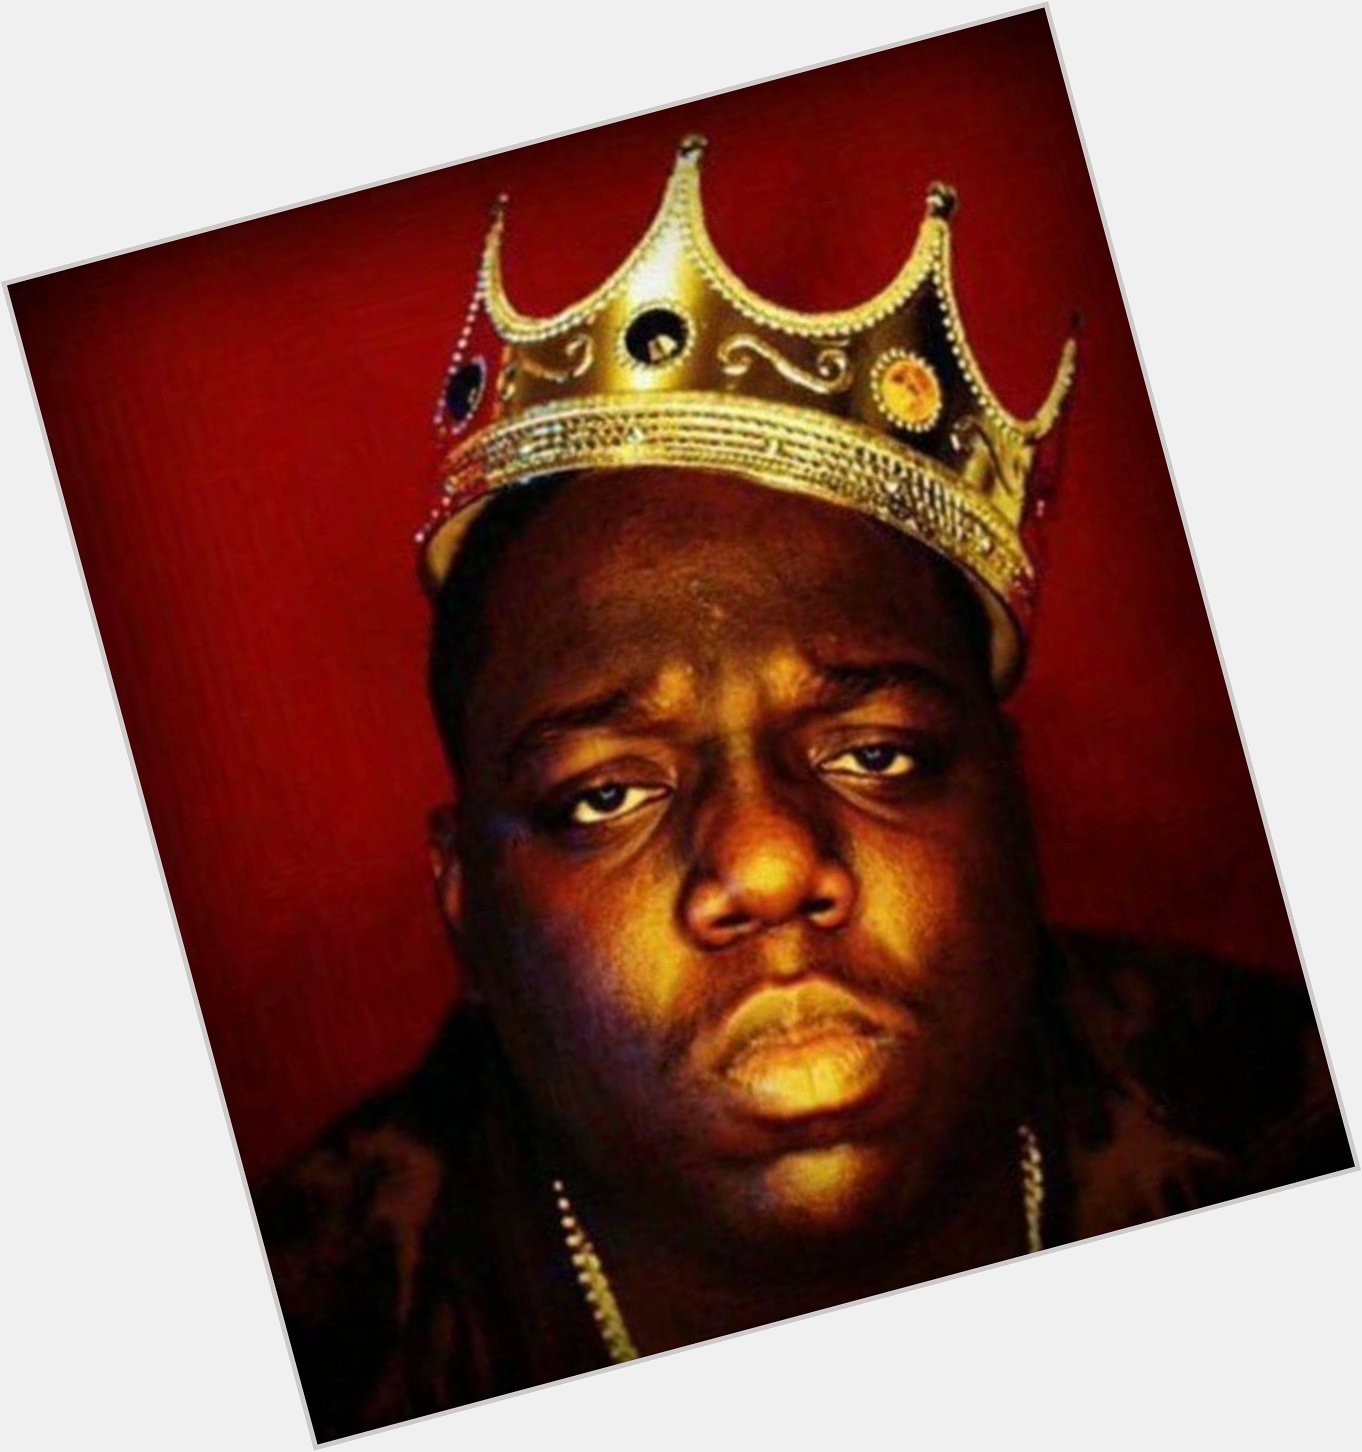 Happy 50th birthday to Christopher Wallace, a.k.a. \"The Notorious B.I.G.\"

(May 21, 1972 - March 9, 1997) 